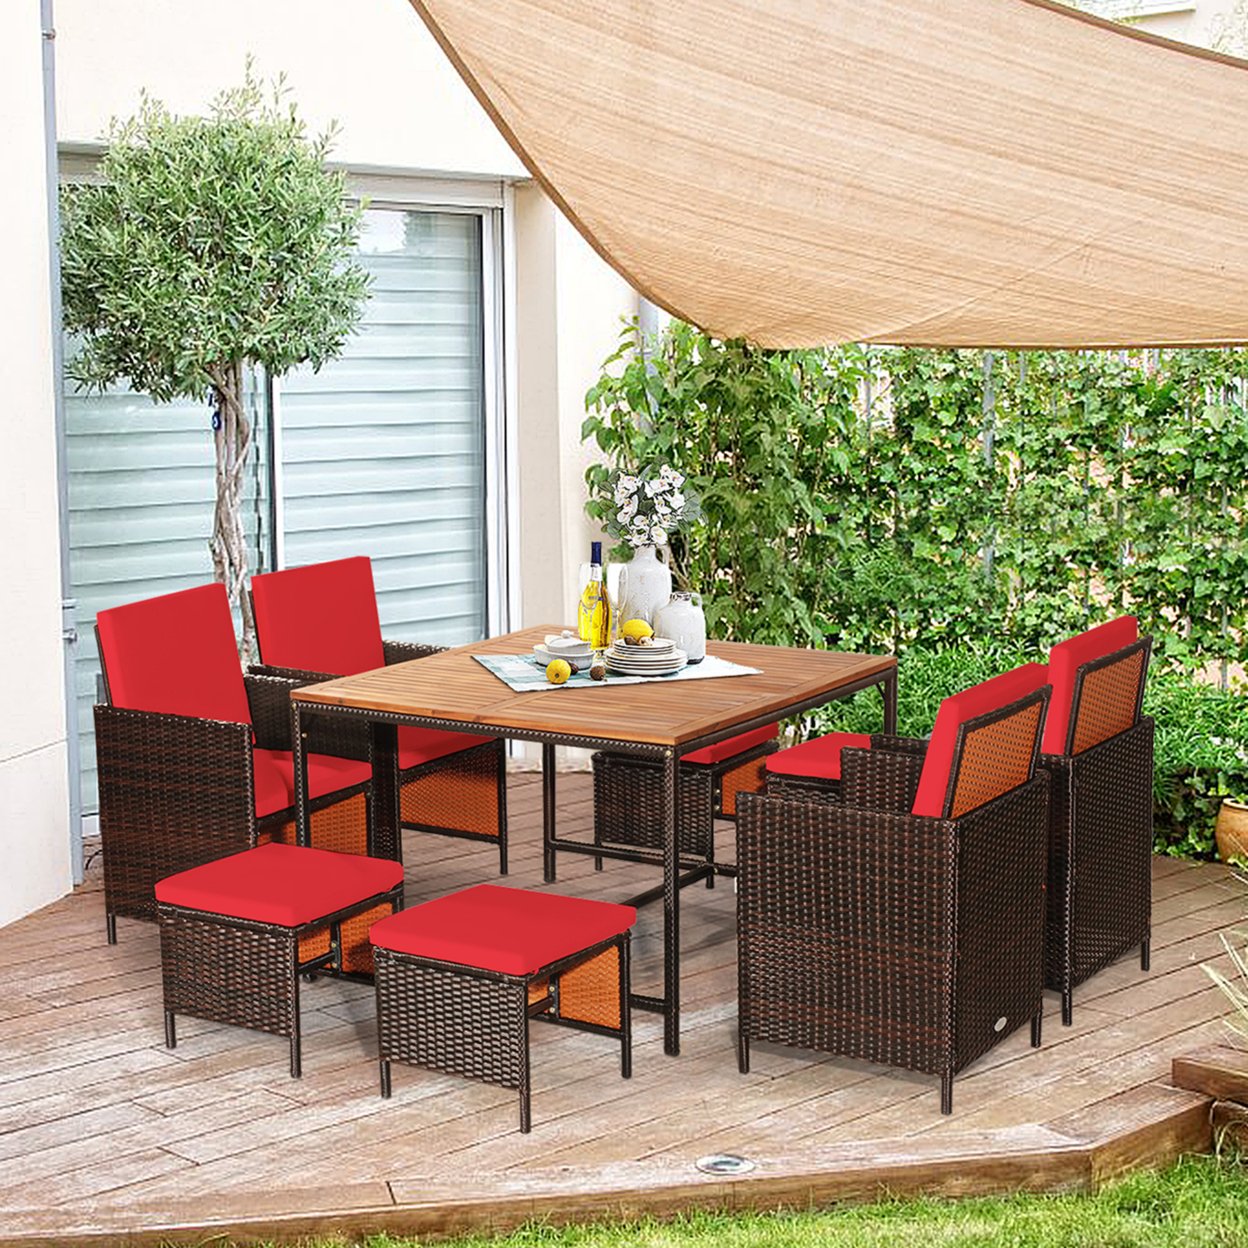 9PCS Rattan Wicker Patio Dining Set Outdoor Furniture Set W/ Red Cushion